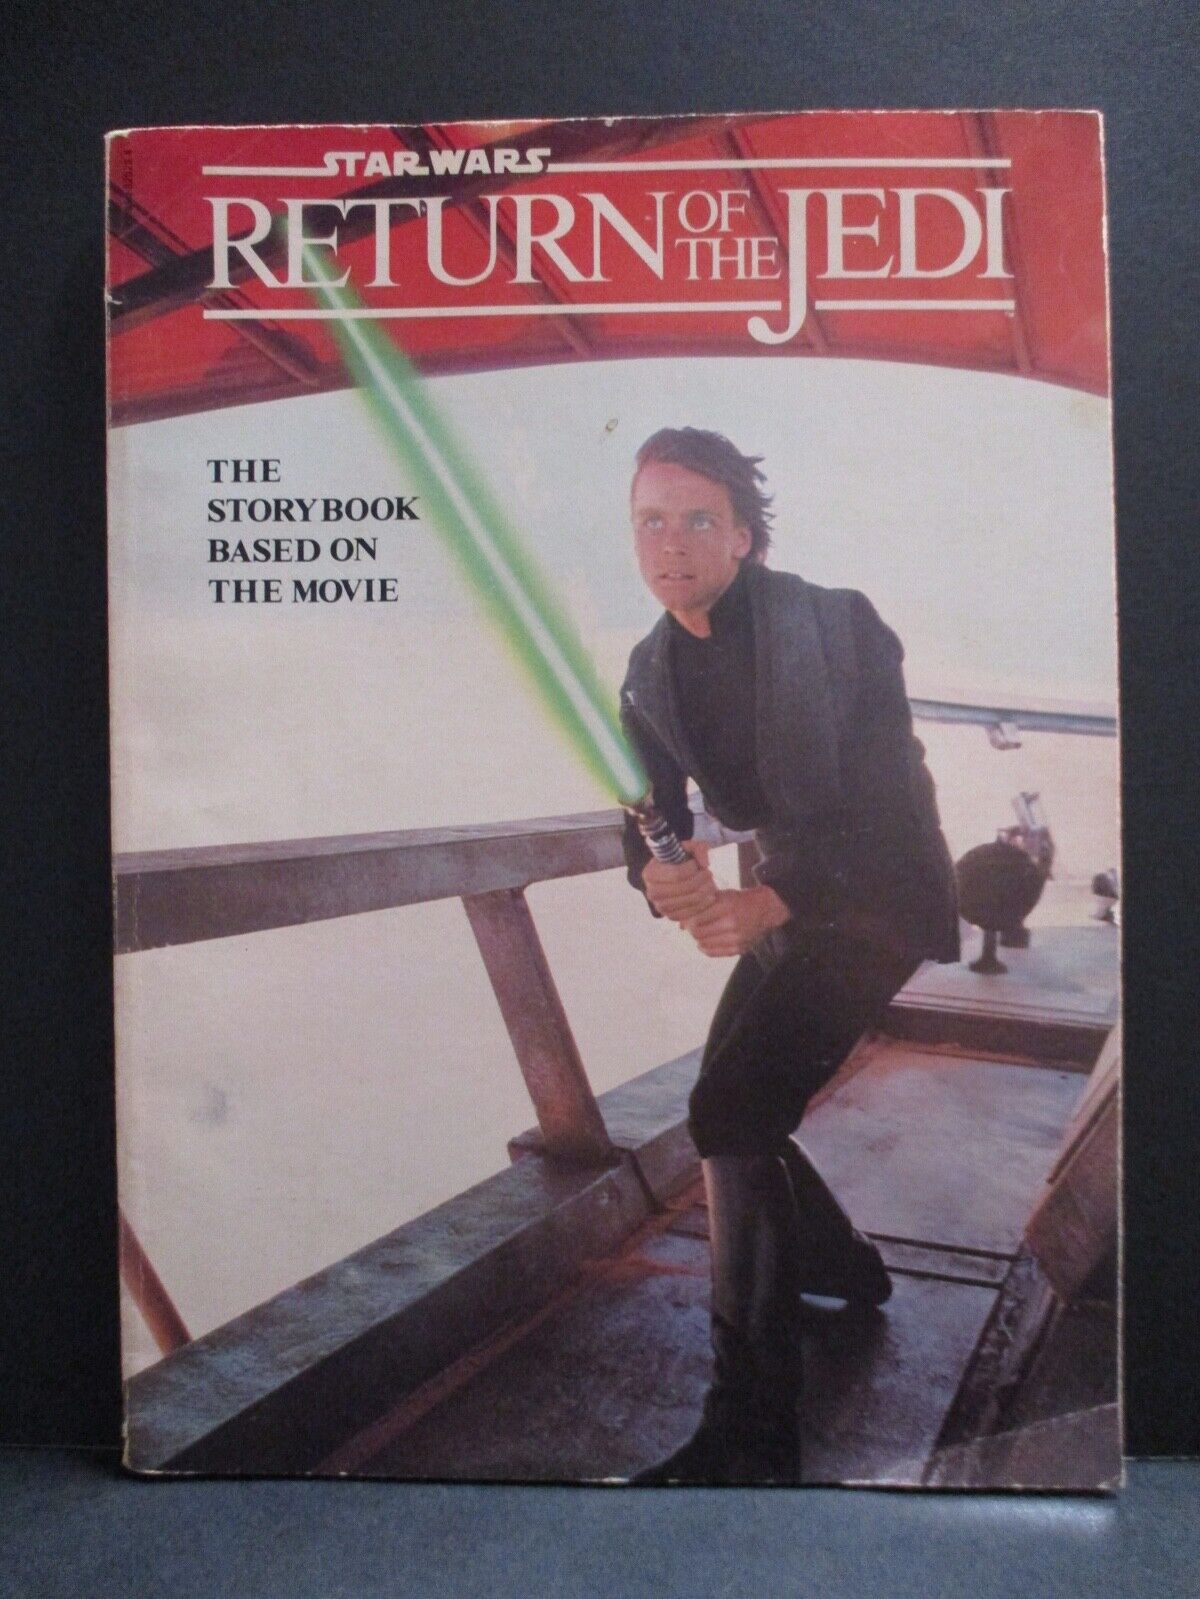 Star Wars The Return of the Jedi Story book 1983 Soft Cover Very Good Condition